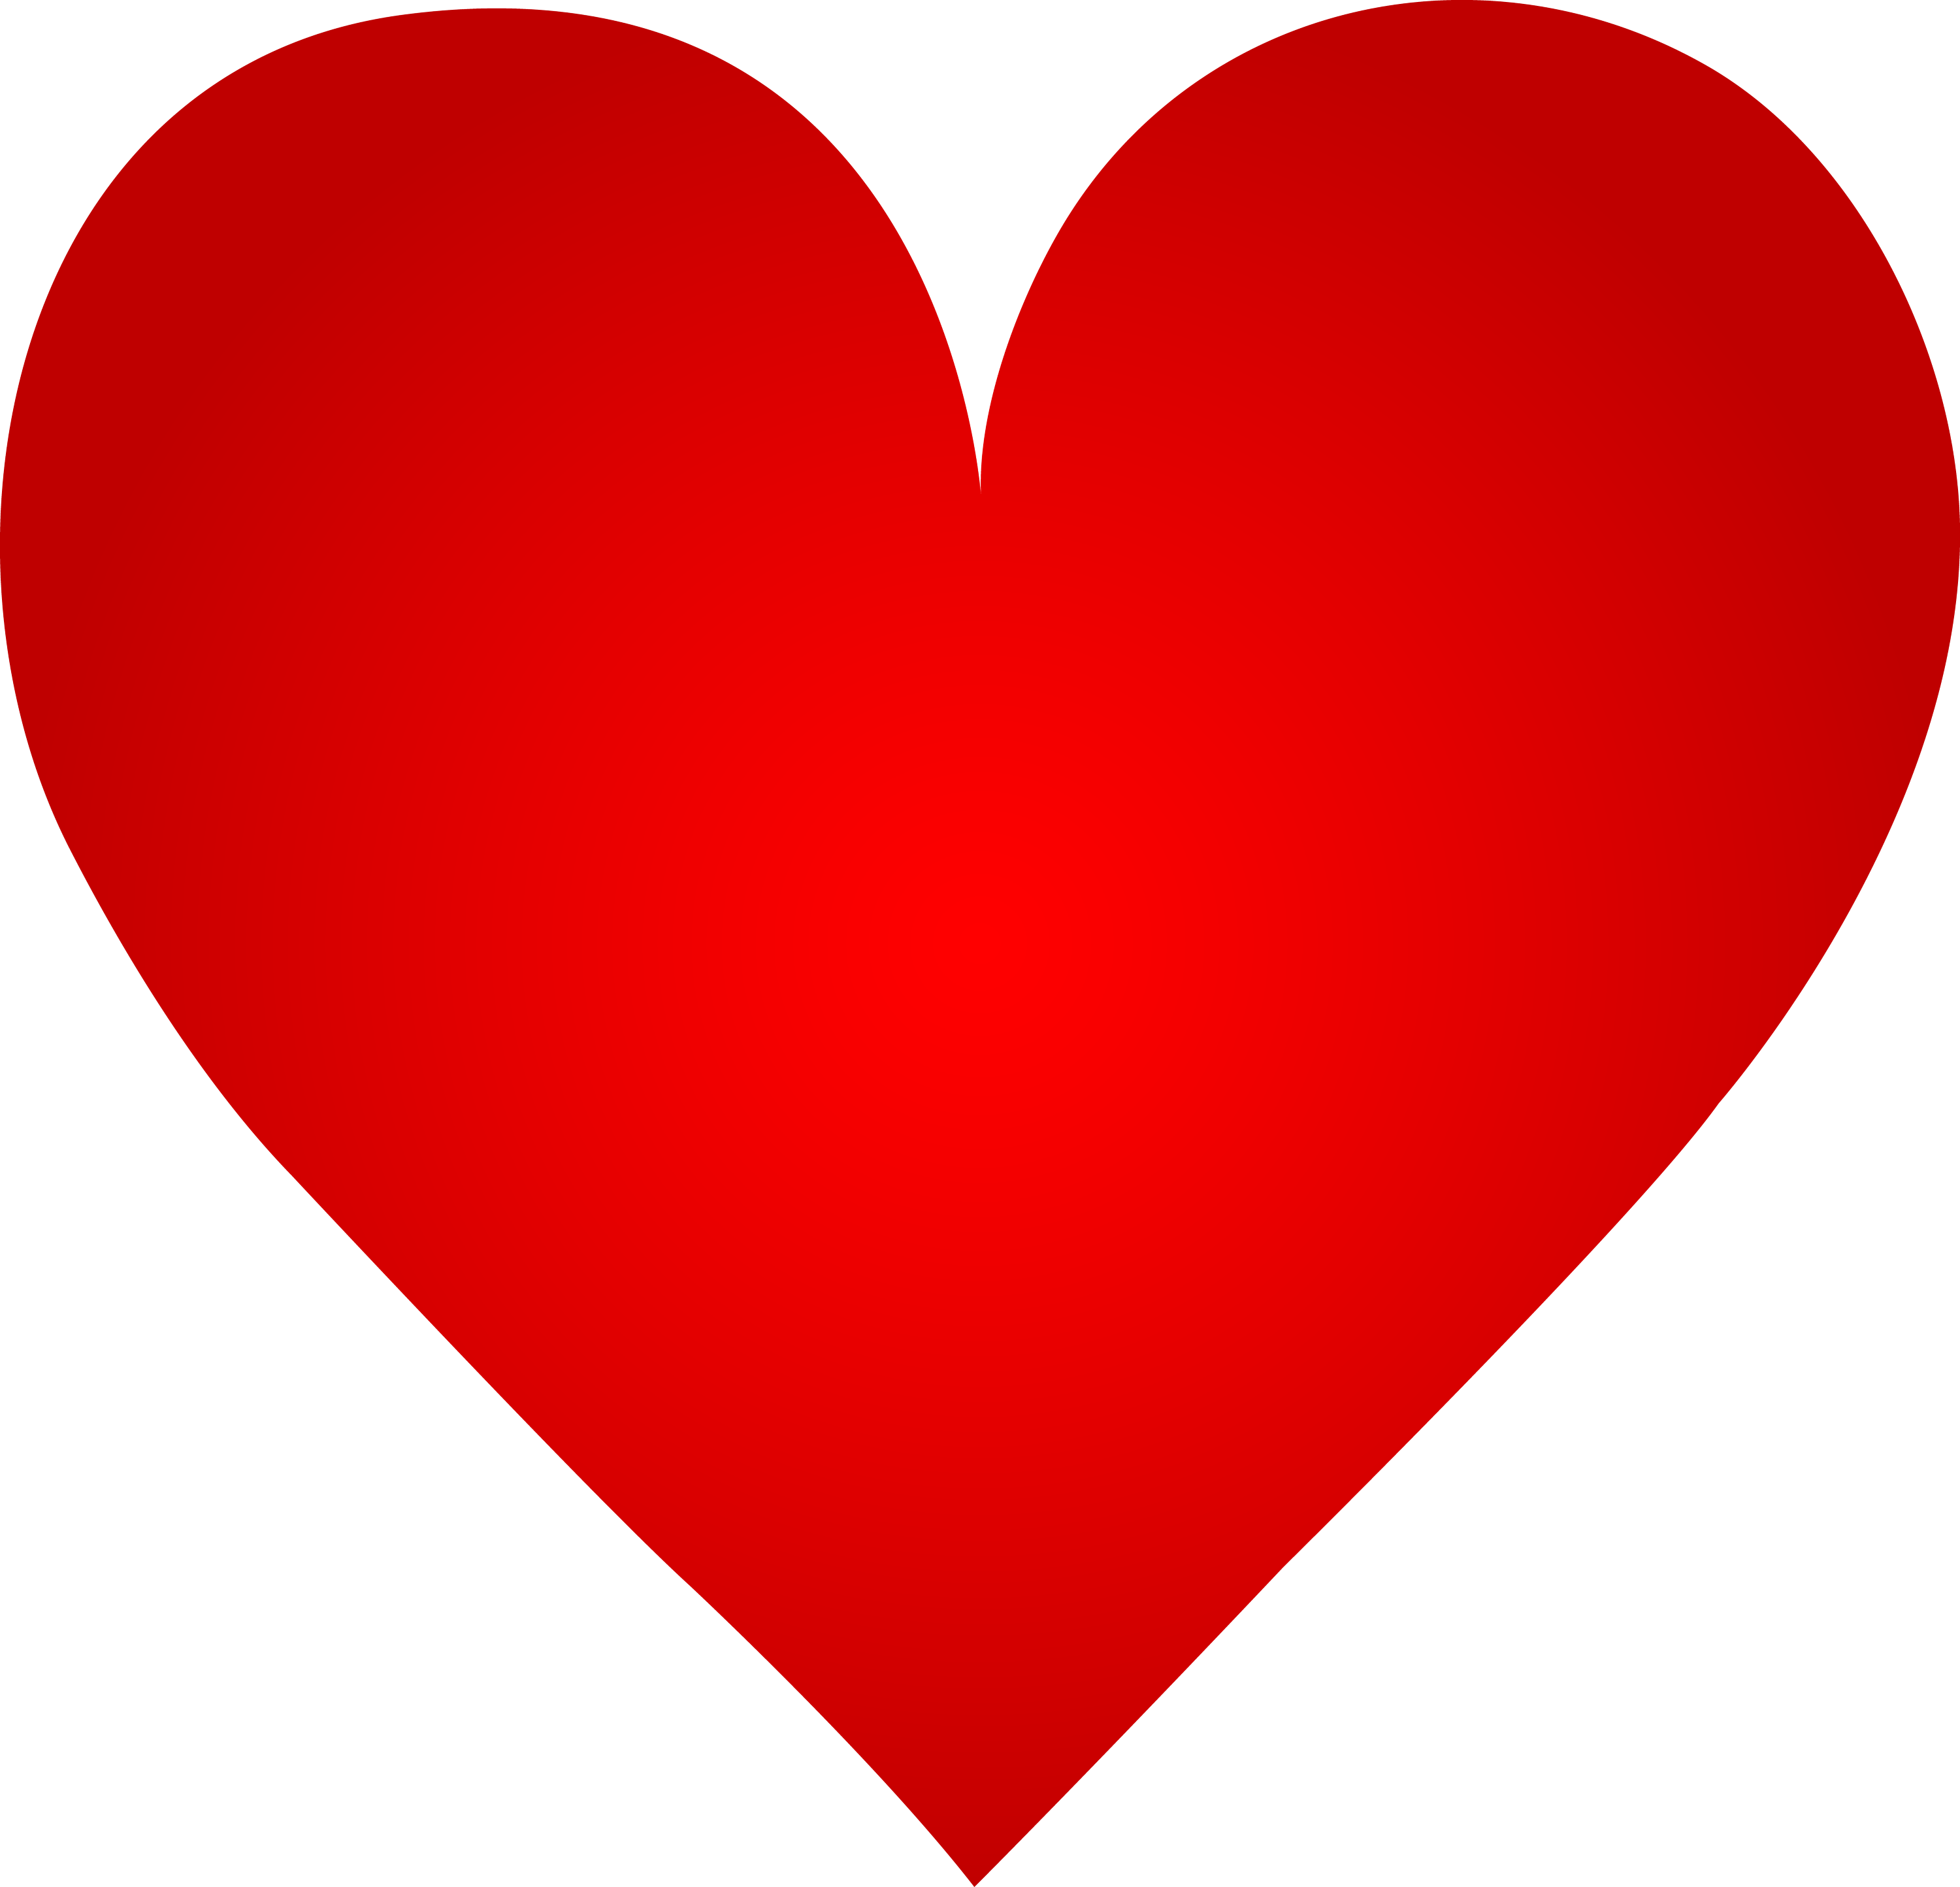 red heart clip art free - photo #21